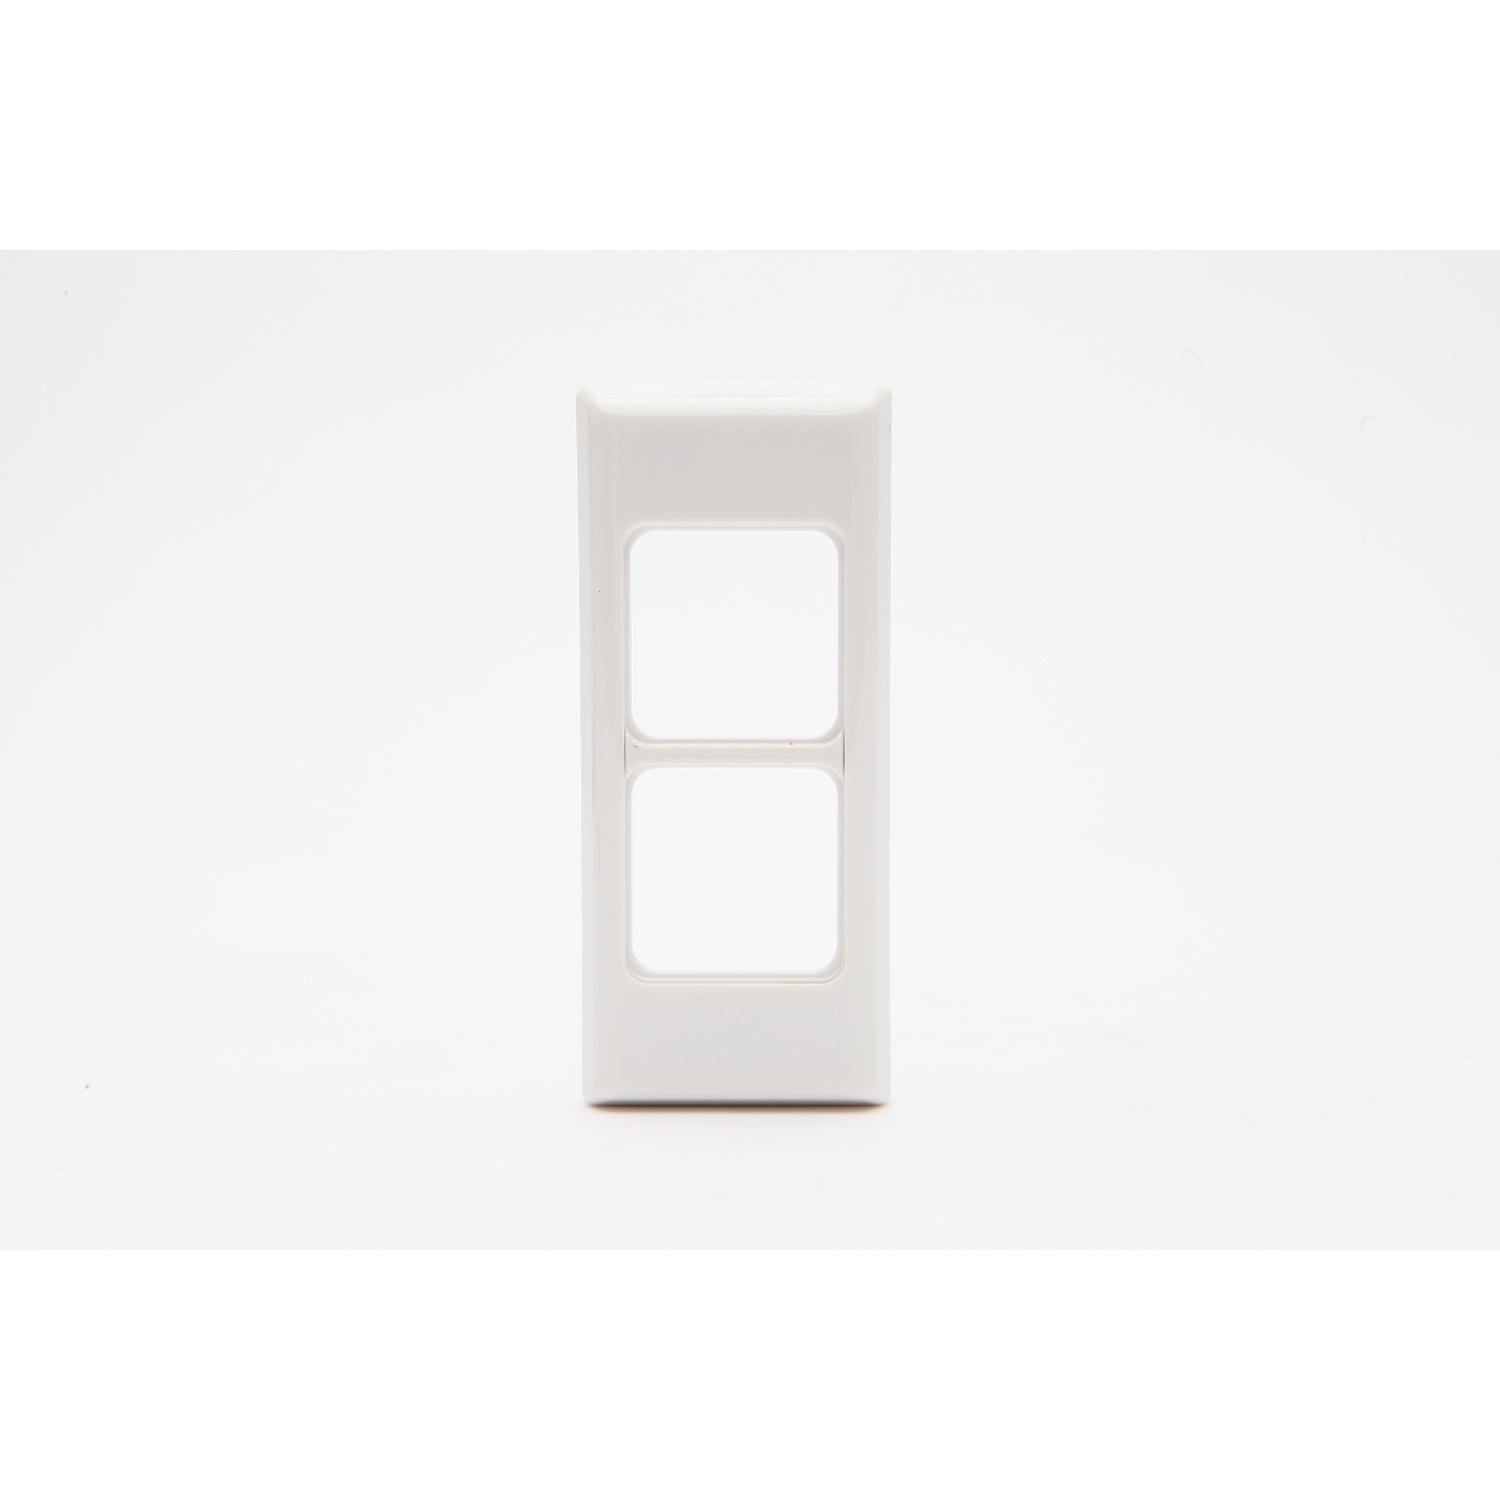 PDL 600 Series - Grid + Cover Architrave Switch 2-Gang - White